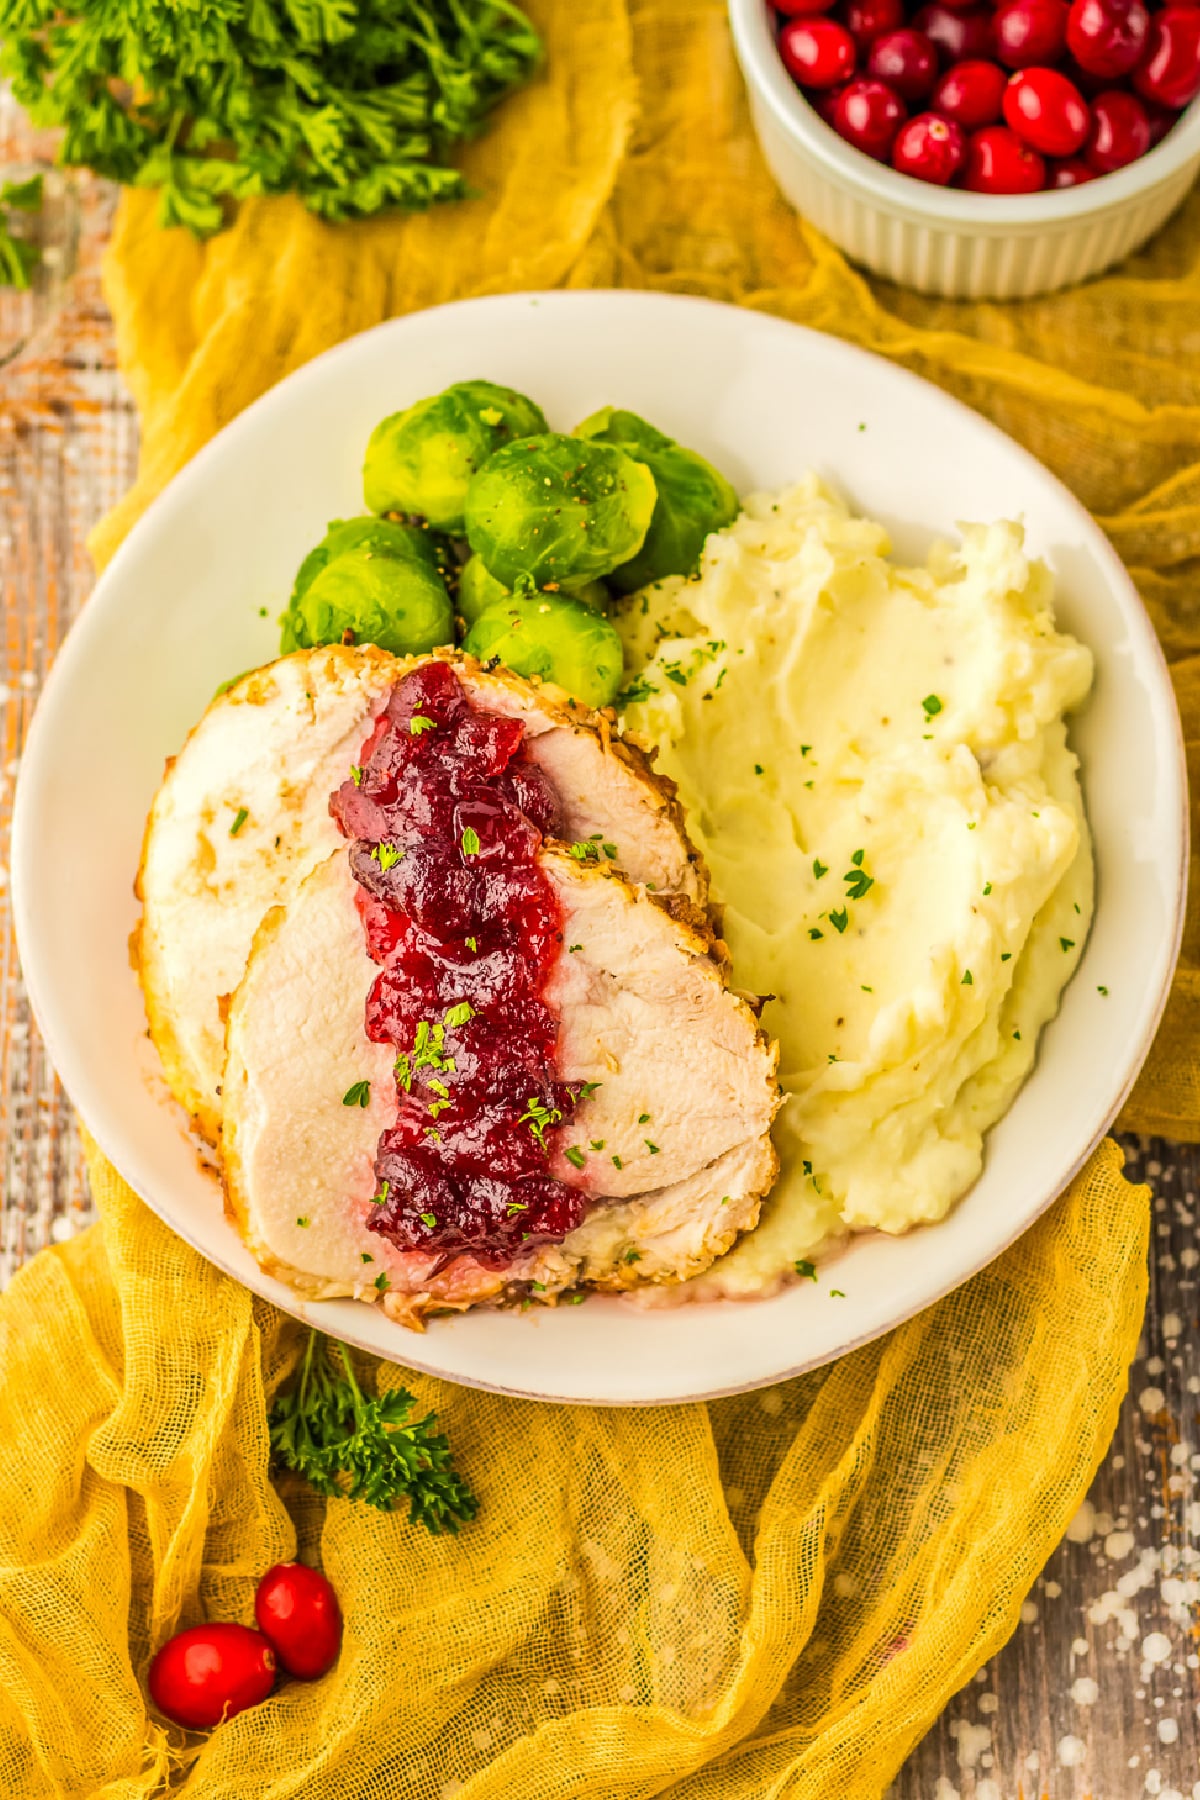 A plate of turkey with cranberry sauce and mashed potatoes from above.